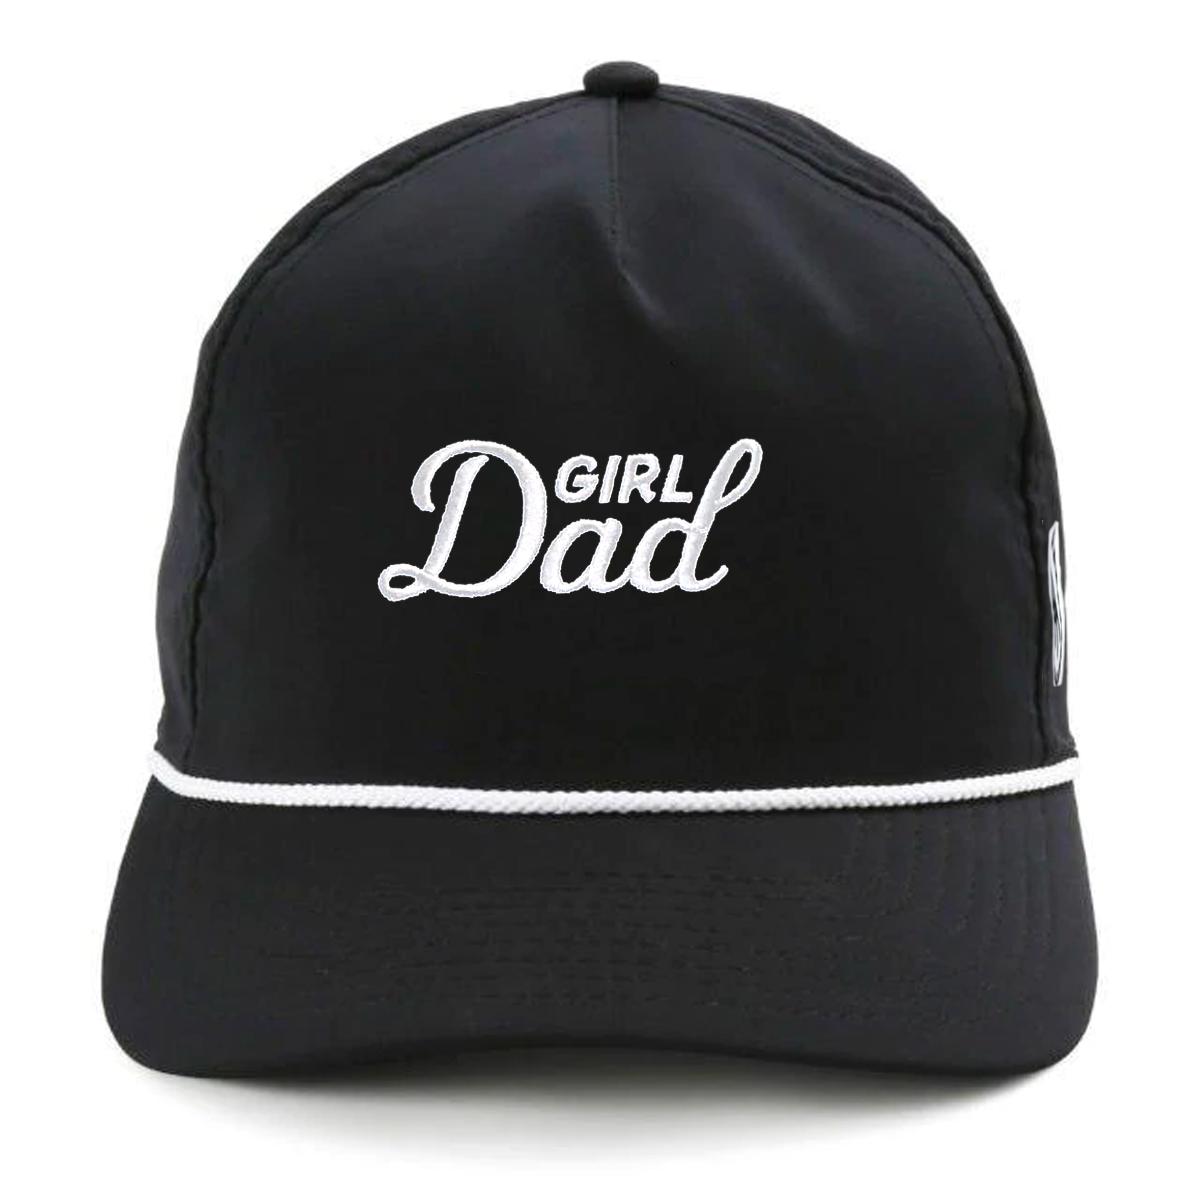 Girl Dad Imperial Rope Hat-Hats-Bussin With The Boys-Black/White-One Size-Barstool Sports